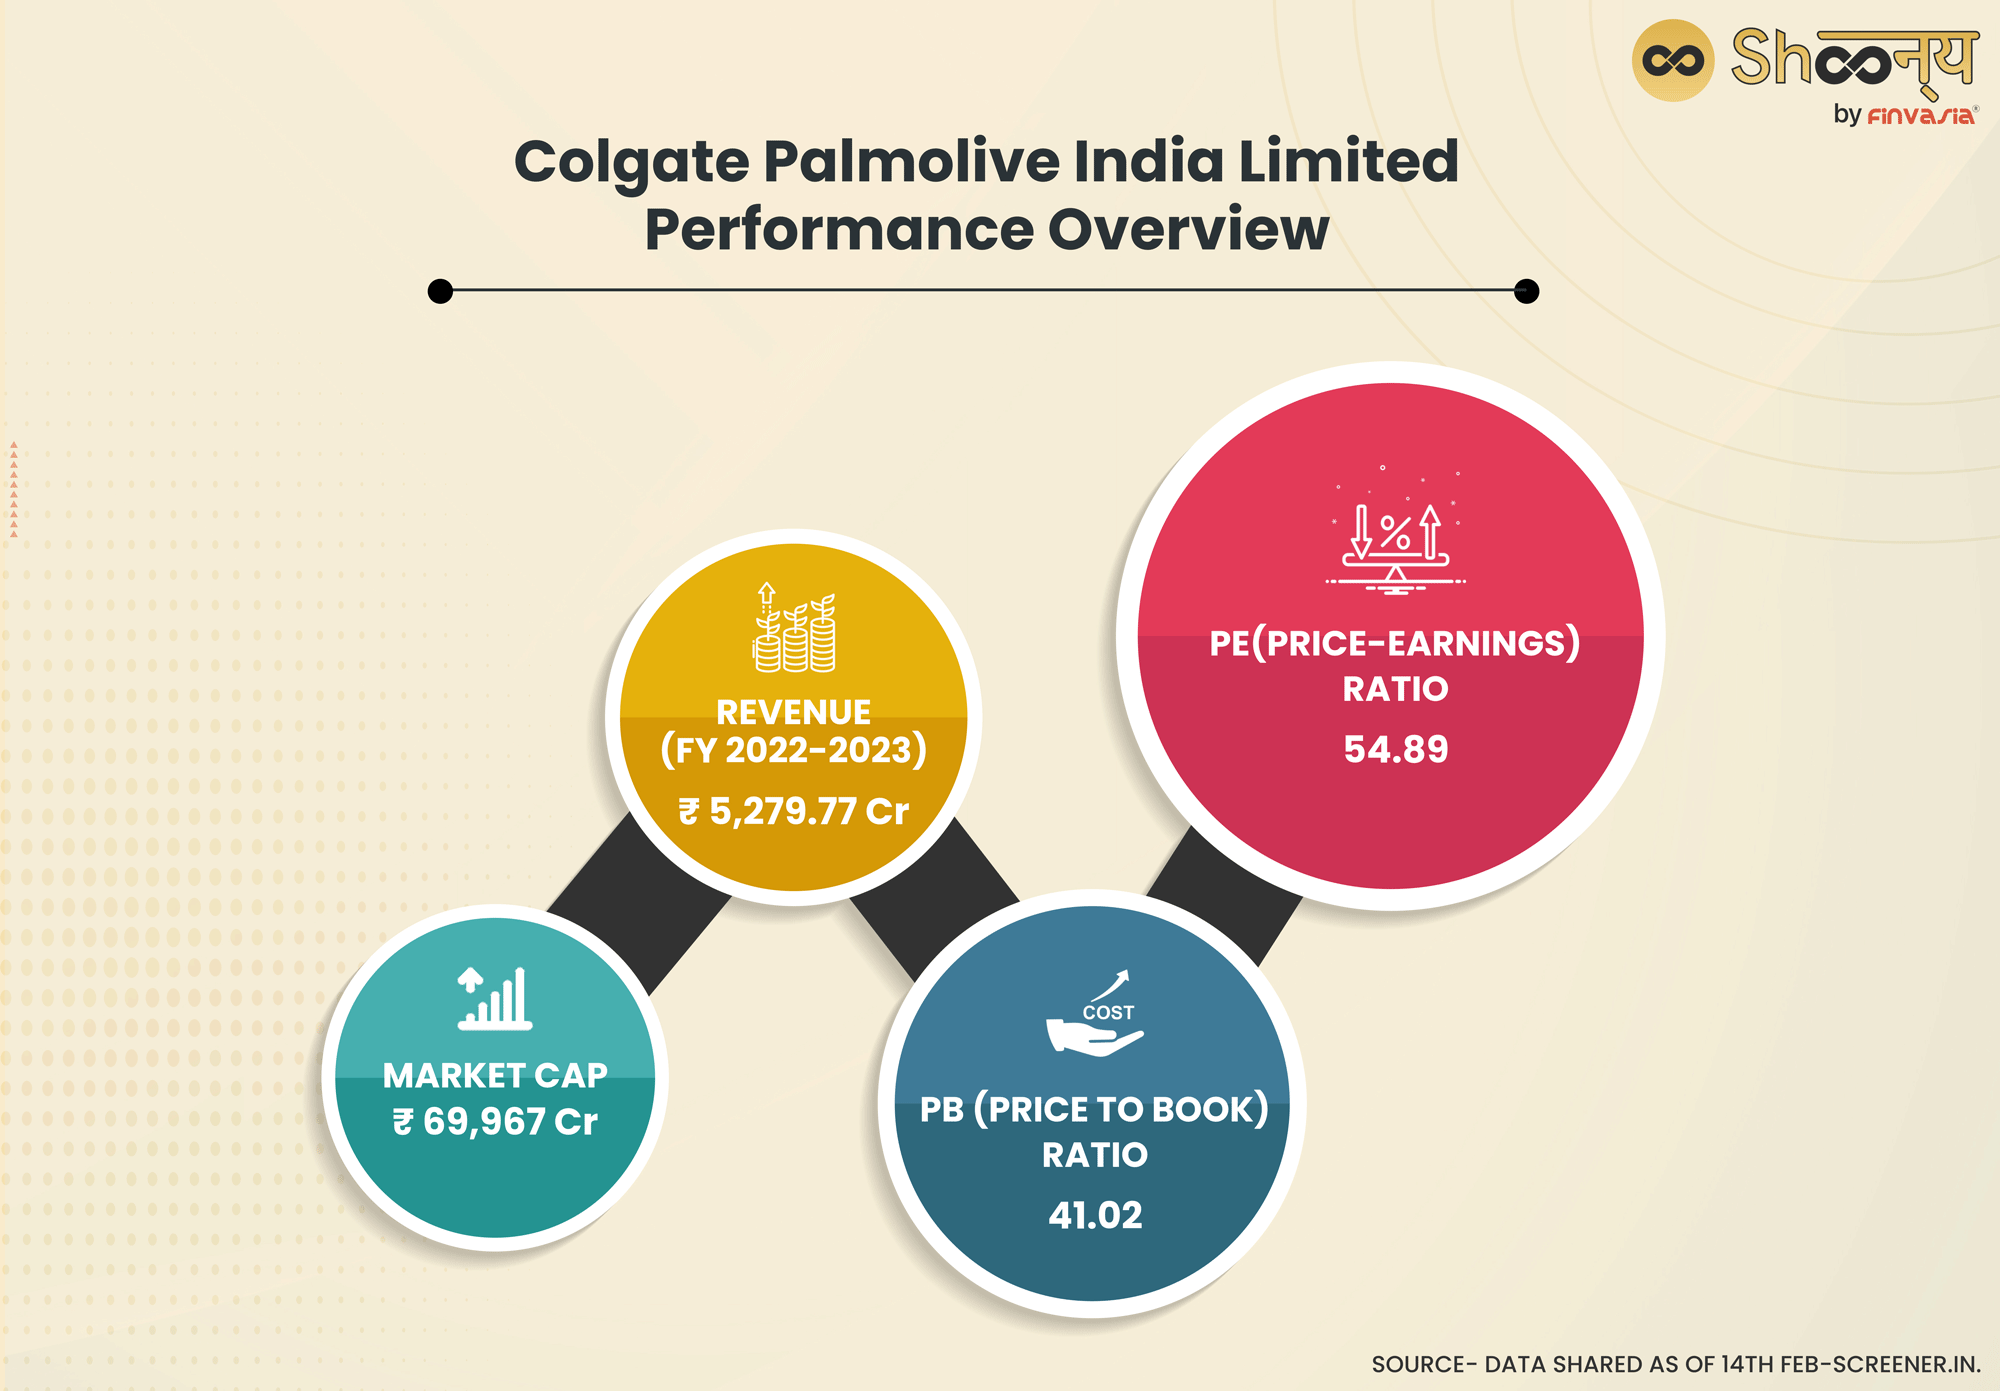 Colgate Palmolive India Limited: Performance Overview 